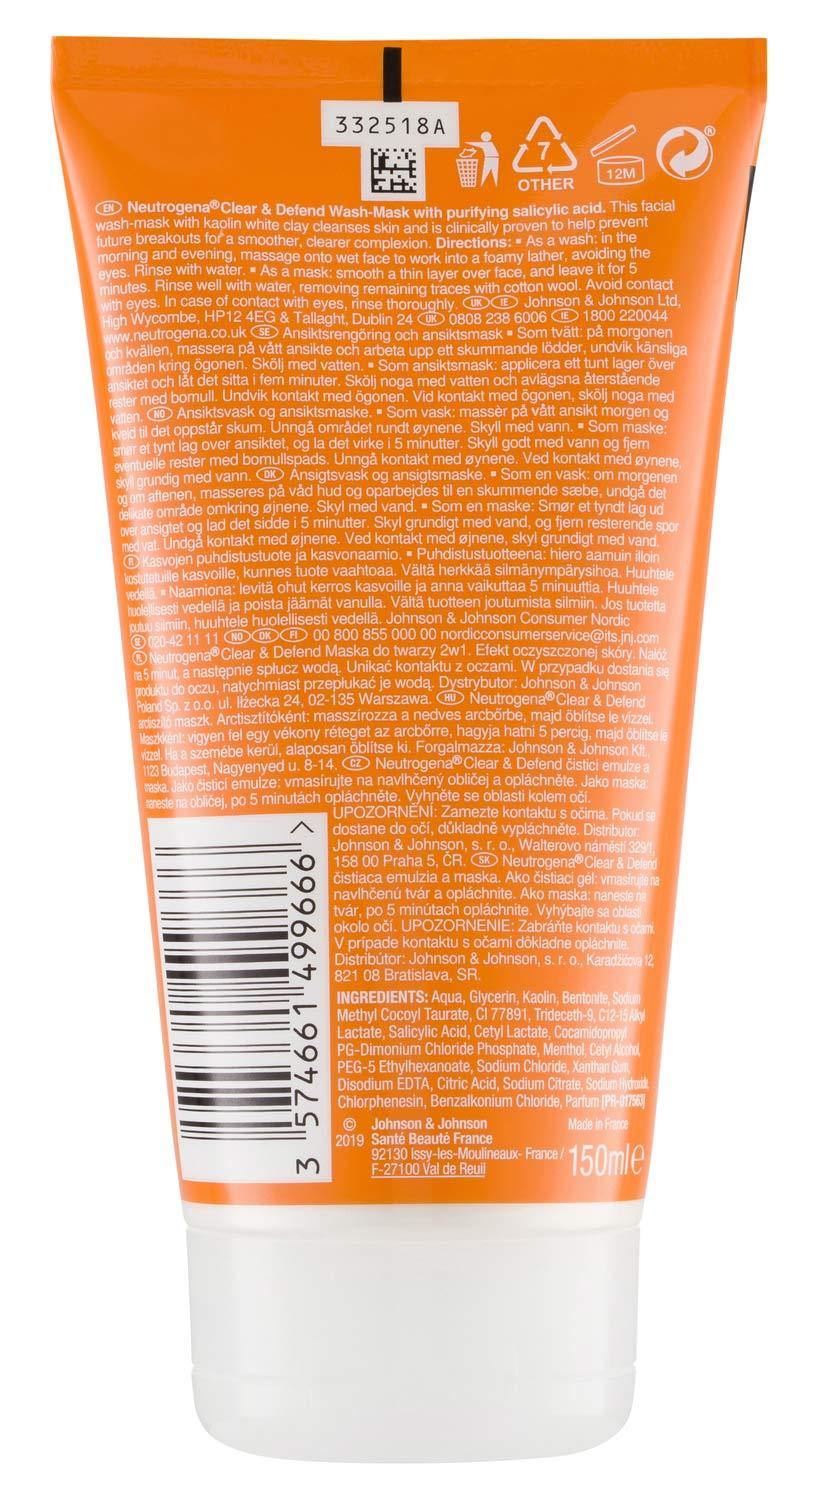 Neutrogena Clear and Defend back view